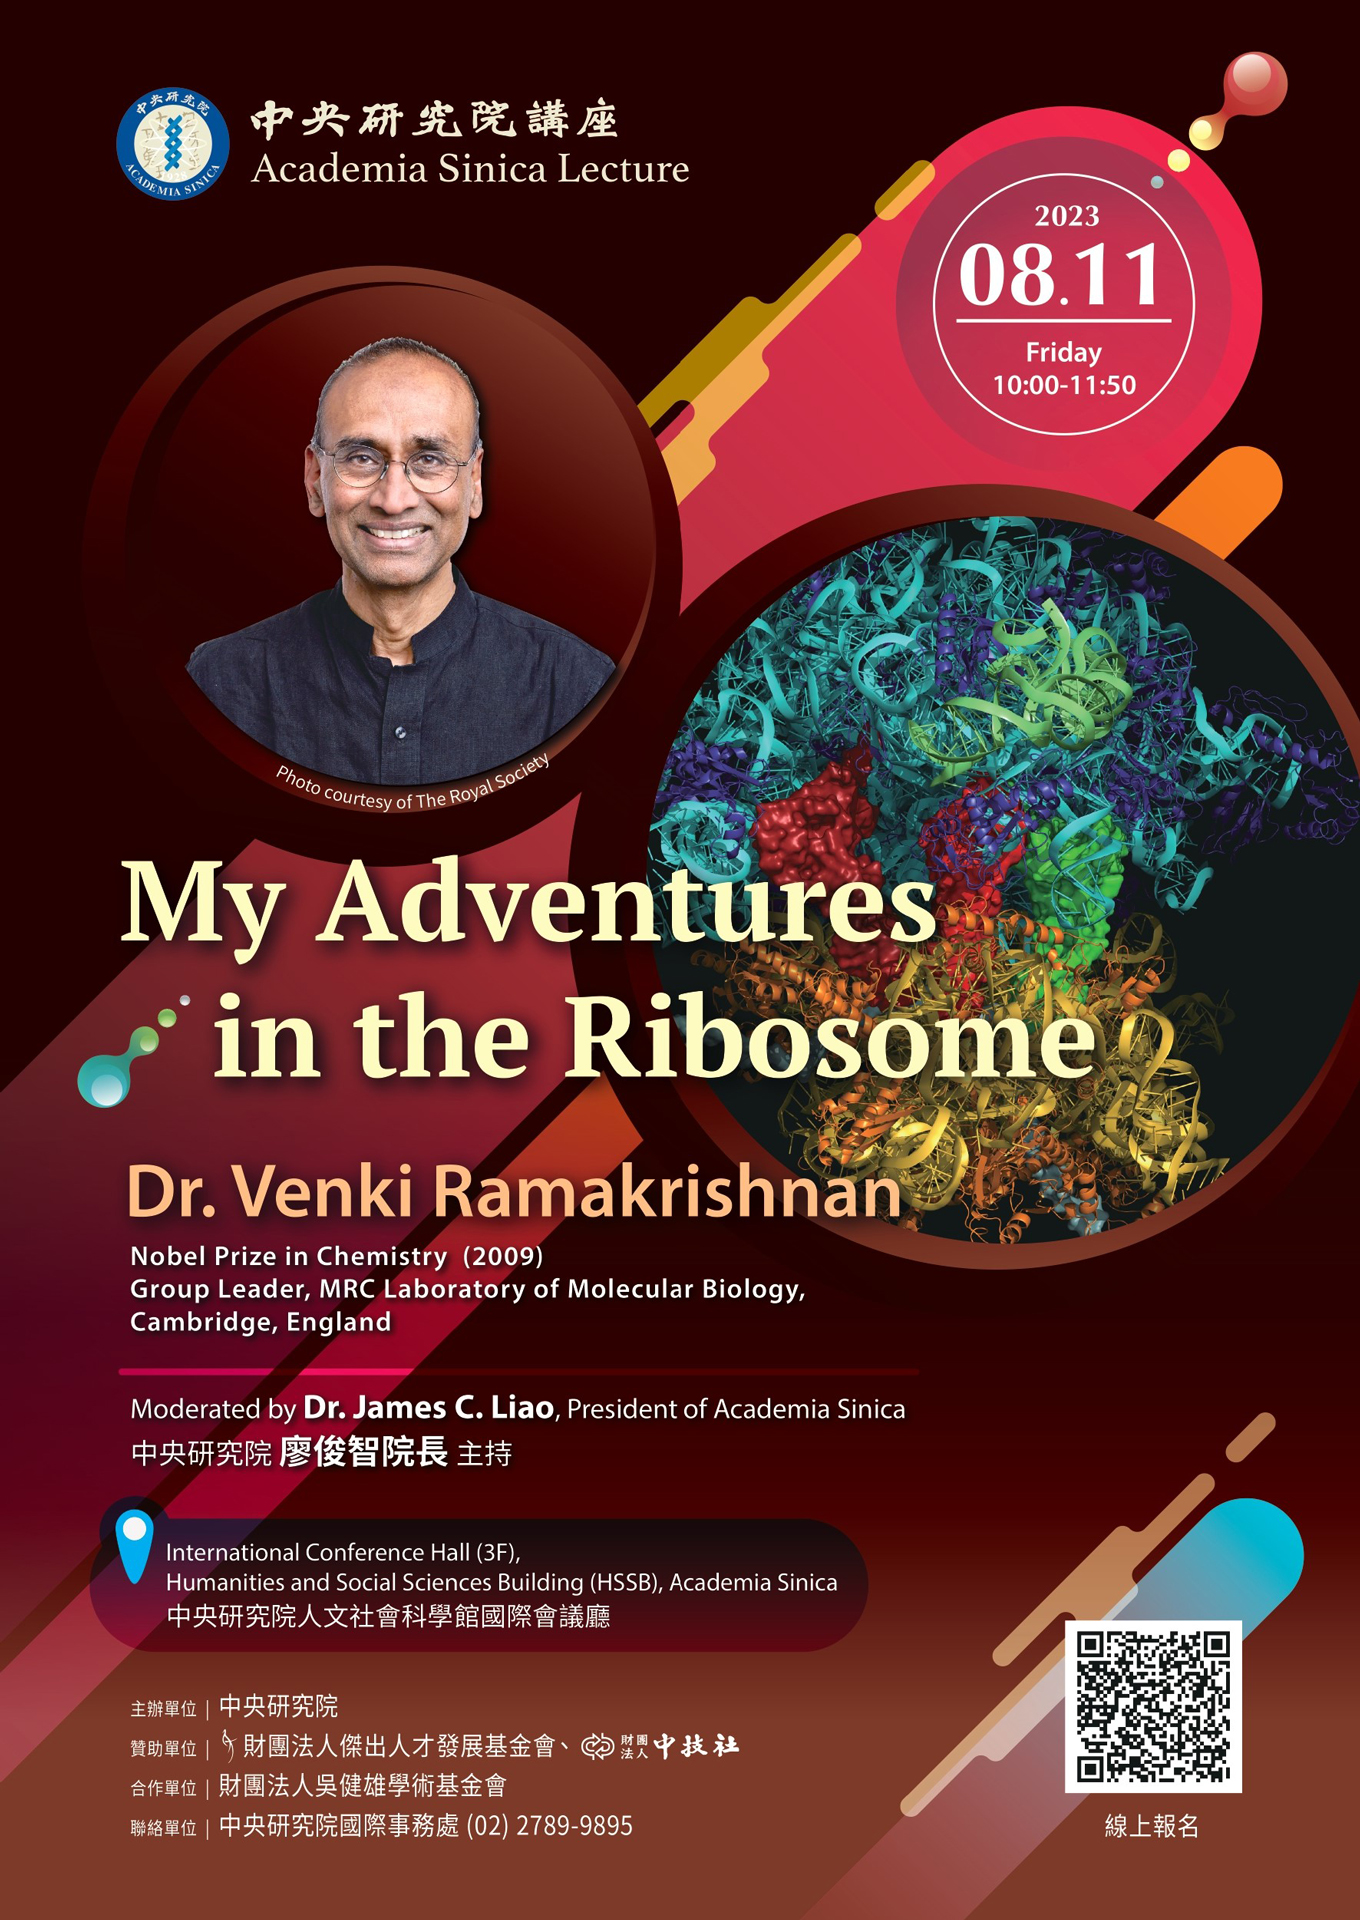 Dr. Venki Ramakrishnan, Nobel Laureate and Structural Biologist, is to Deliver Lecture on Ribosomes in the 2023 Academia Sinica Lecture Series